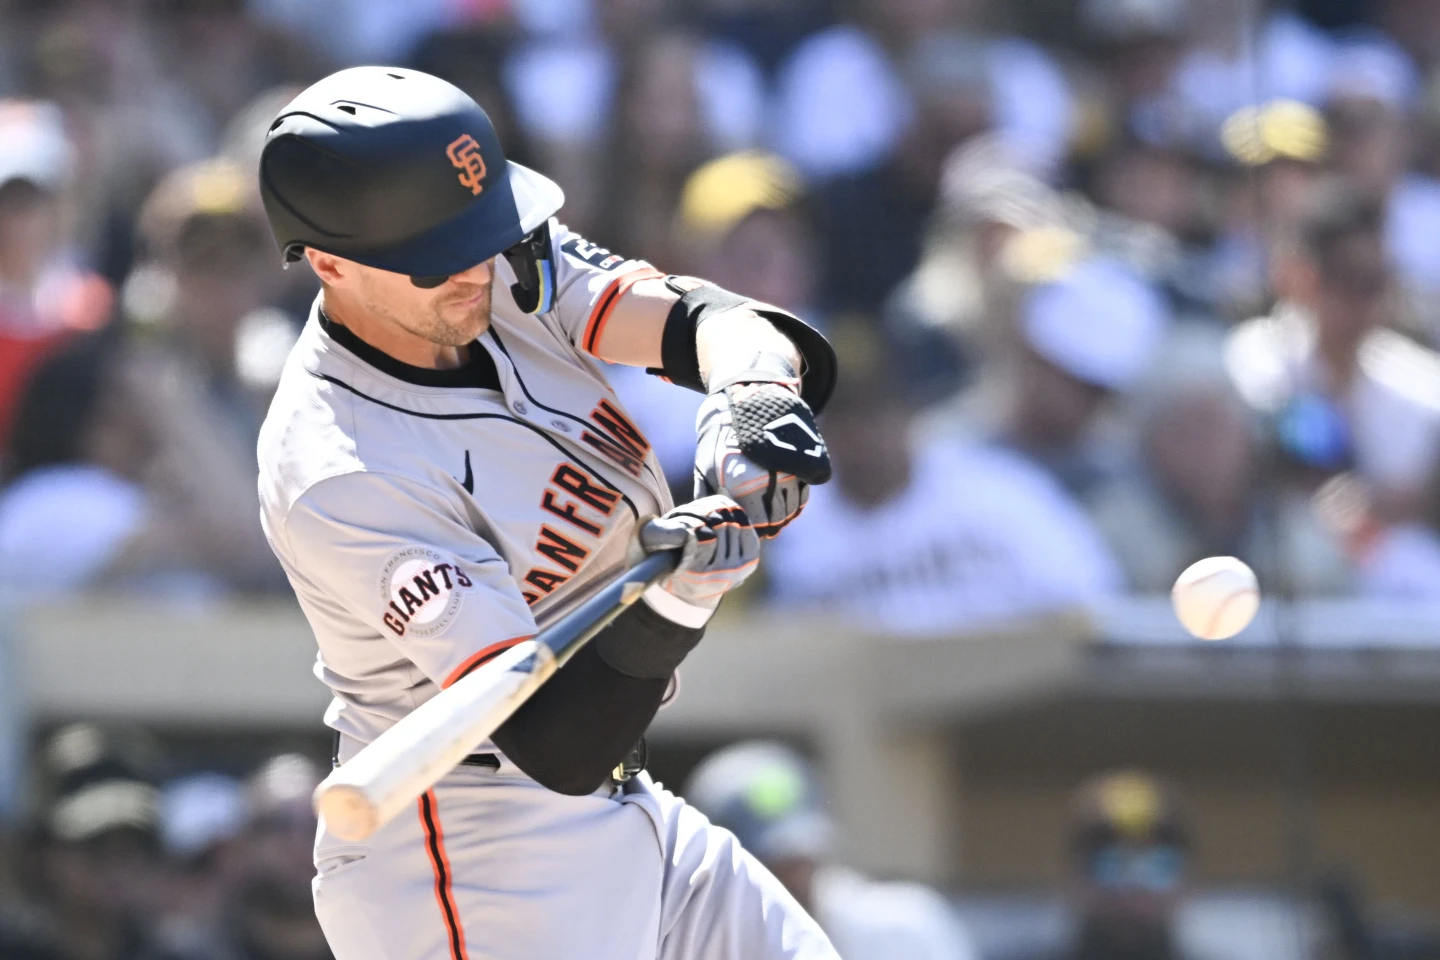 A key hit from Cronenworth contributes to the San Diego Padres' 6-4 victory over the San Francisco Giants managed by Melvin